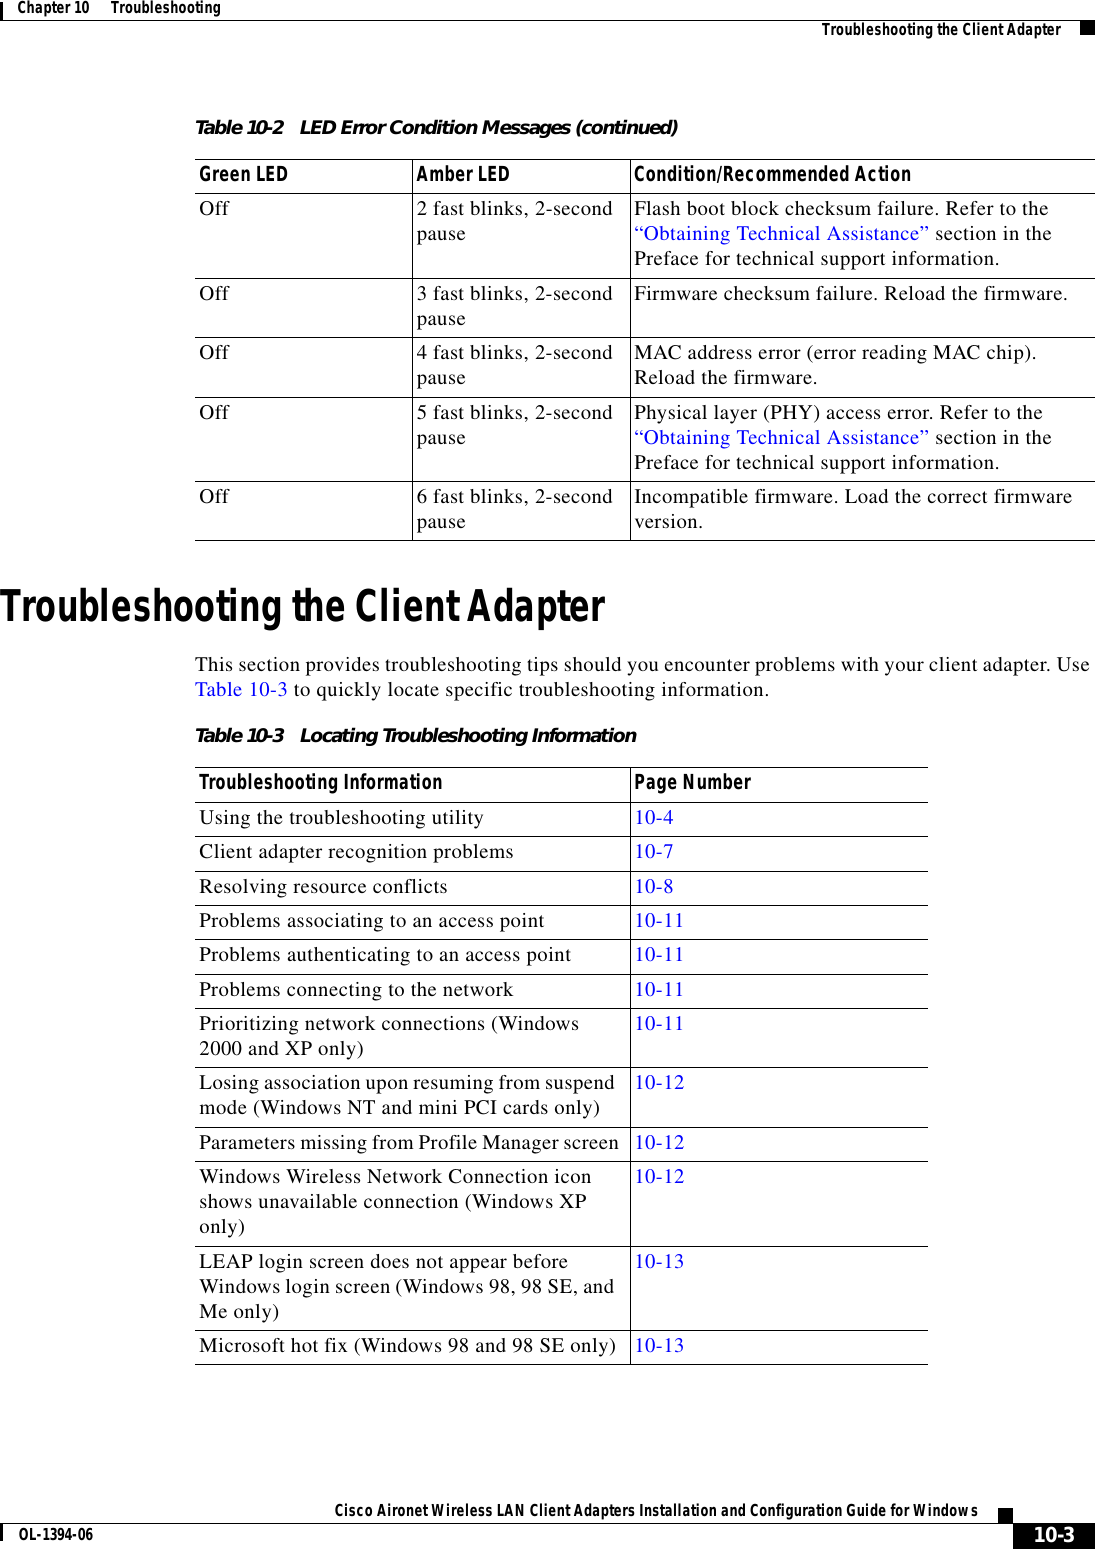 10-3Cisco Aironet Wireless LAN Client Adapters Installation and Configuration Guide for WindowsOL-1394-06Chapter 10      Troubleshooting Troubleshooting the Client AdapterTroubleshooting the Client AdapterThis section provides troubleshooting tips should you encounter problems with your client adapter. Use Table 10-3 to quickly locate specific troubleshooting information.Off 2 fast blinks, 2-second pause Flash boot block checksum failure. Refer to the “Obtaining Technical Assistance” section in the Preface for technical support information.Off 3 fast blinks, 2-second pause Firmware checksum failure. Reload the firmware.Off 4 fast blinks, 2-second pause MAC address error (error reading MAC chip). Reload the firmware.Off 5 fast blinks, 2-second pause Physical layer (PHY) access error. Refer to the “Obtaining Technical Assistance” section in the Preface for technical support information.Off 6 fast blinks, 2-second pause Incompatible firmware. Load the correct firmware version.Table 10-2 LED Error Condition Messages (continued)Green LED Amber LED Condition/Recommended ActionTable 10-3 Locating Troubleshooting InformationTroubleshooting Information Page NumberUsing the troubleshooting utility 10-4Client adapter recognition problems 10-7Resolving resource conflicts 10-8Problems associating to an access point 10-11Problems authenticating to an access point 10-11Problems connecting to the network 10-11Prioritizing network connections (Windows 2000 and XP only) 10-11Losing association upon resuming from suspend mode (Windows NT and mini PCI cards only) 10-12Parameters missing from Profile Manager screen 10-12Windows Wireless Network Connection icon shows unavailable connection (Windows XP only)10-12LEAP login screen does not appear before Windows login screen (Windows 98, 98 SE, and Me only)10-13Microsoft hot fix (Windows 98 and 98 SE only) 10-13